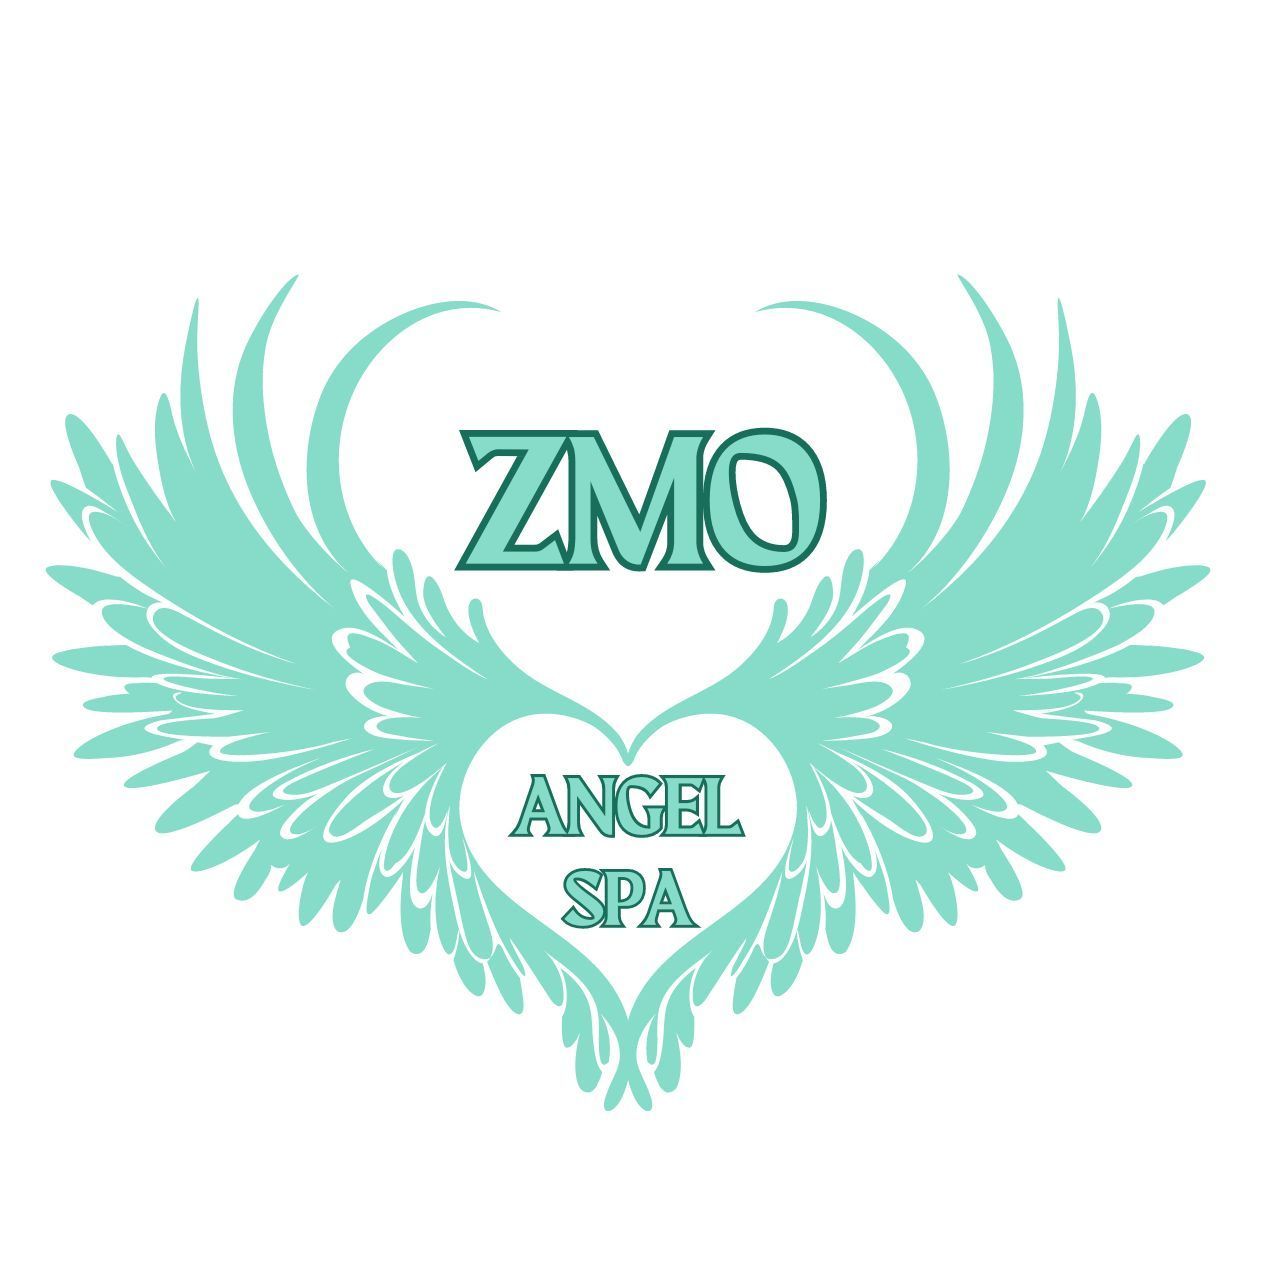 ZMO ANGEL SPA, 1450 neo city, Kissimmee, 34744